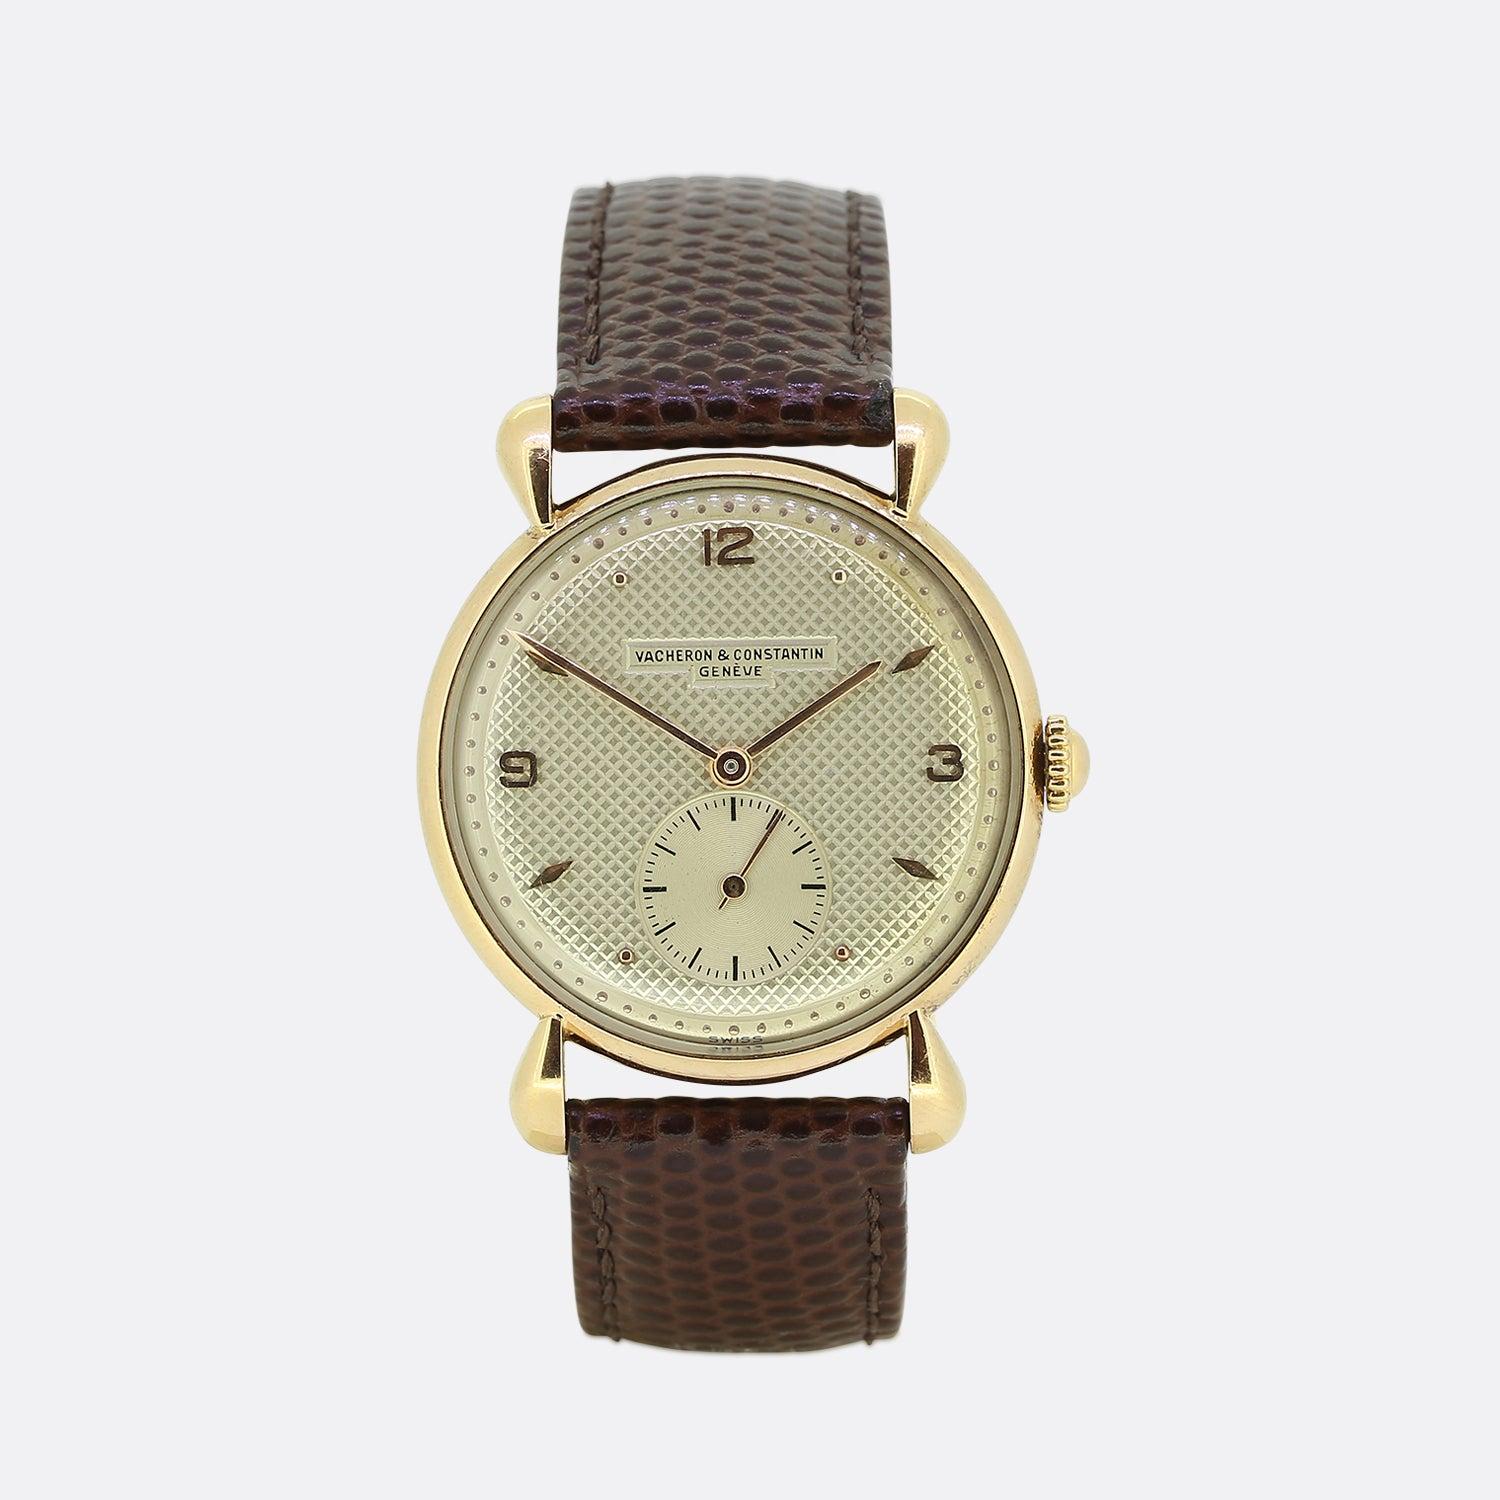 This is a beautifully made watch from the designer Vacheron & Constantin. The watch features an 18ct rose gold case and crown and has been finished with a dark brown leather strap. The watch was made in the 1950s and has wonderful fancy tear drops